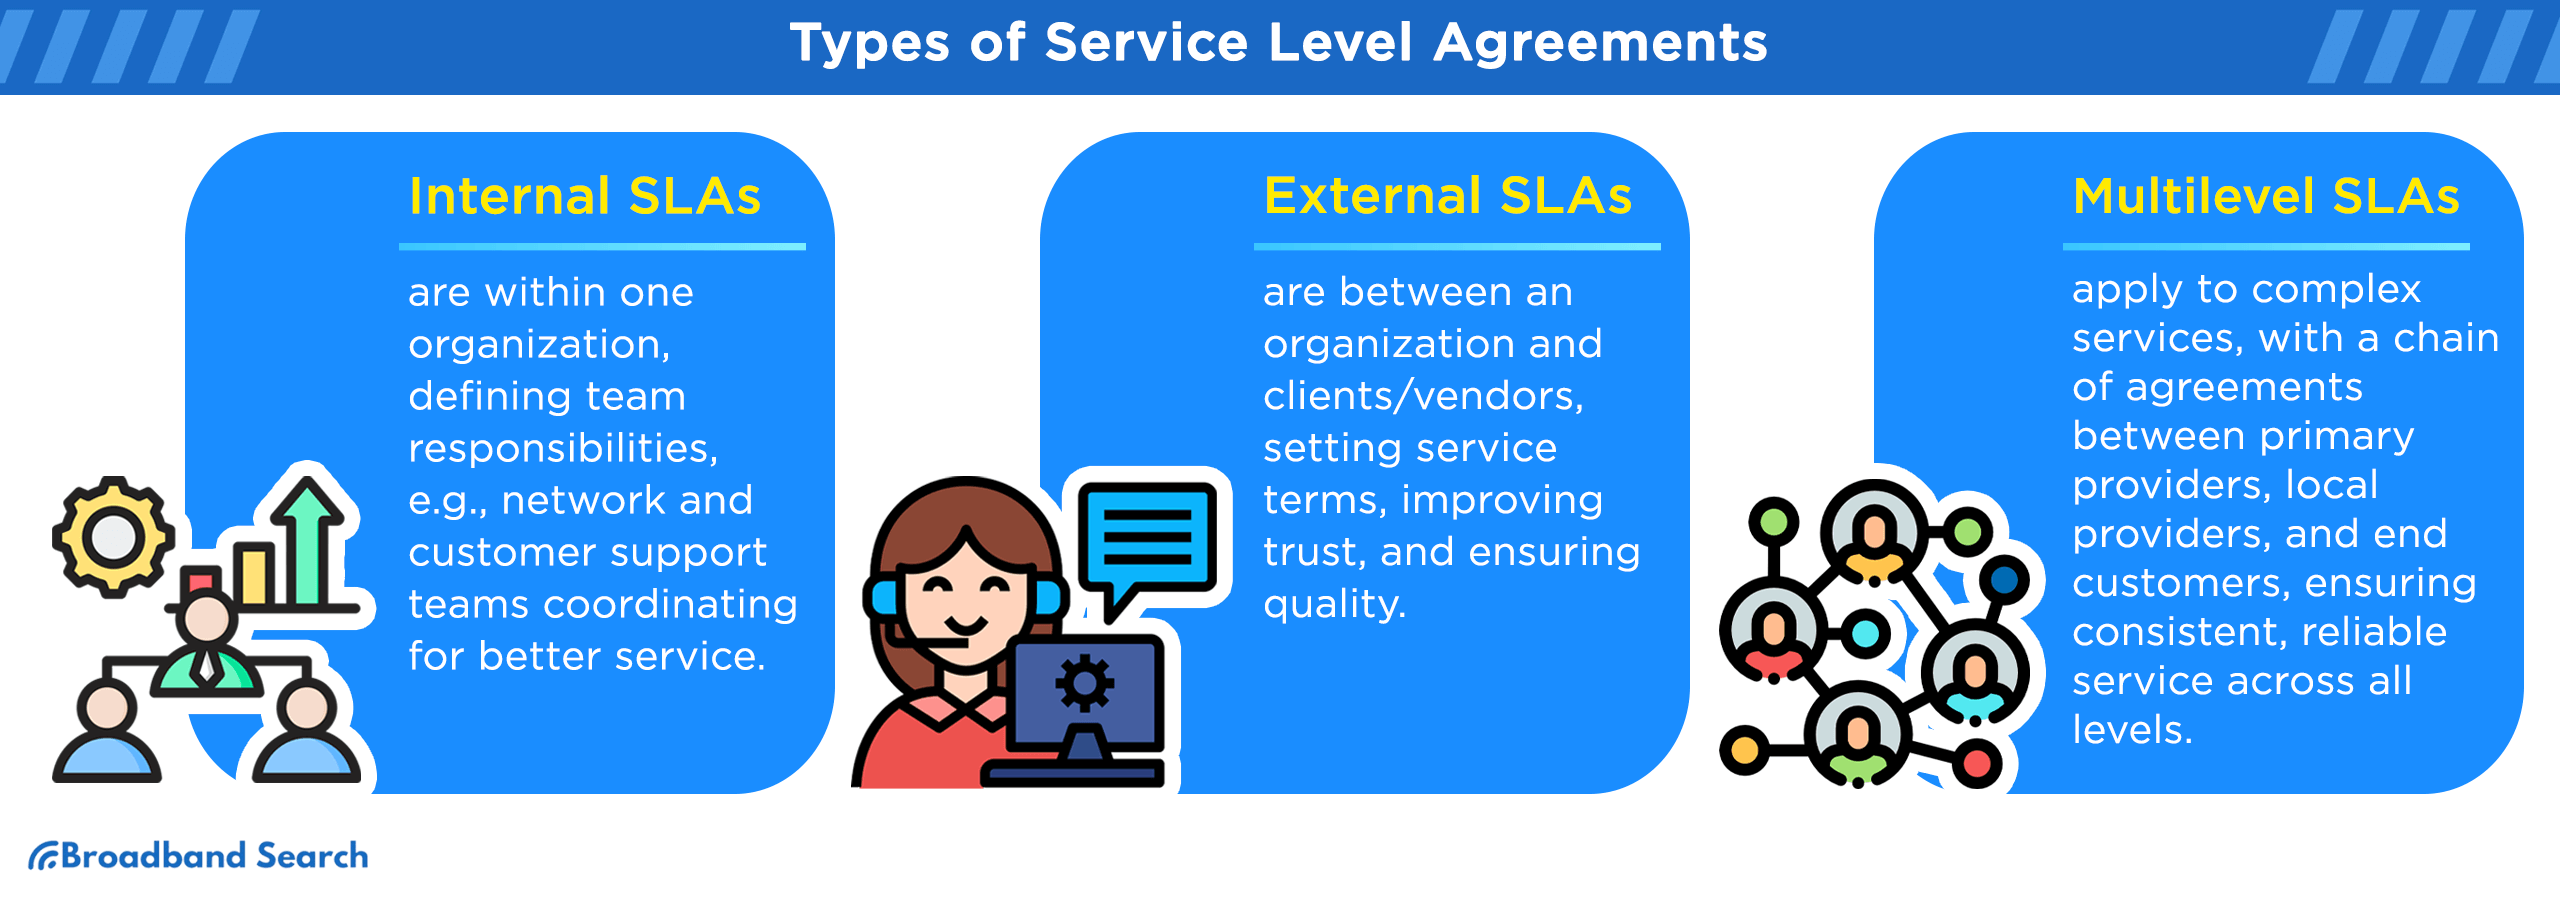 types of service level agreements